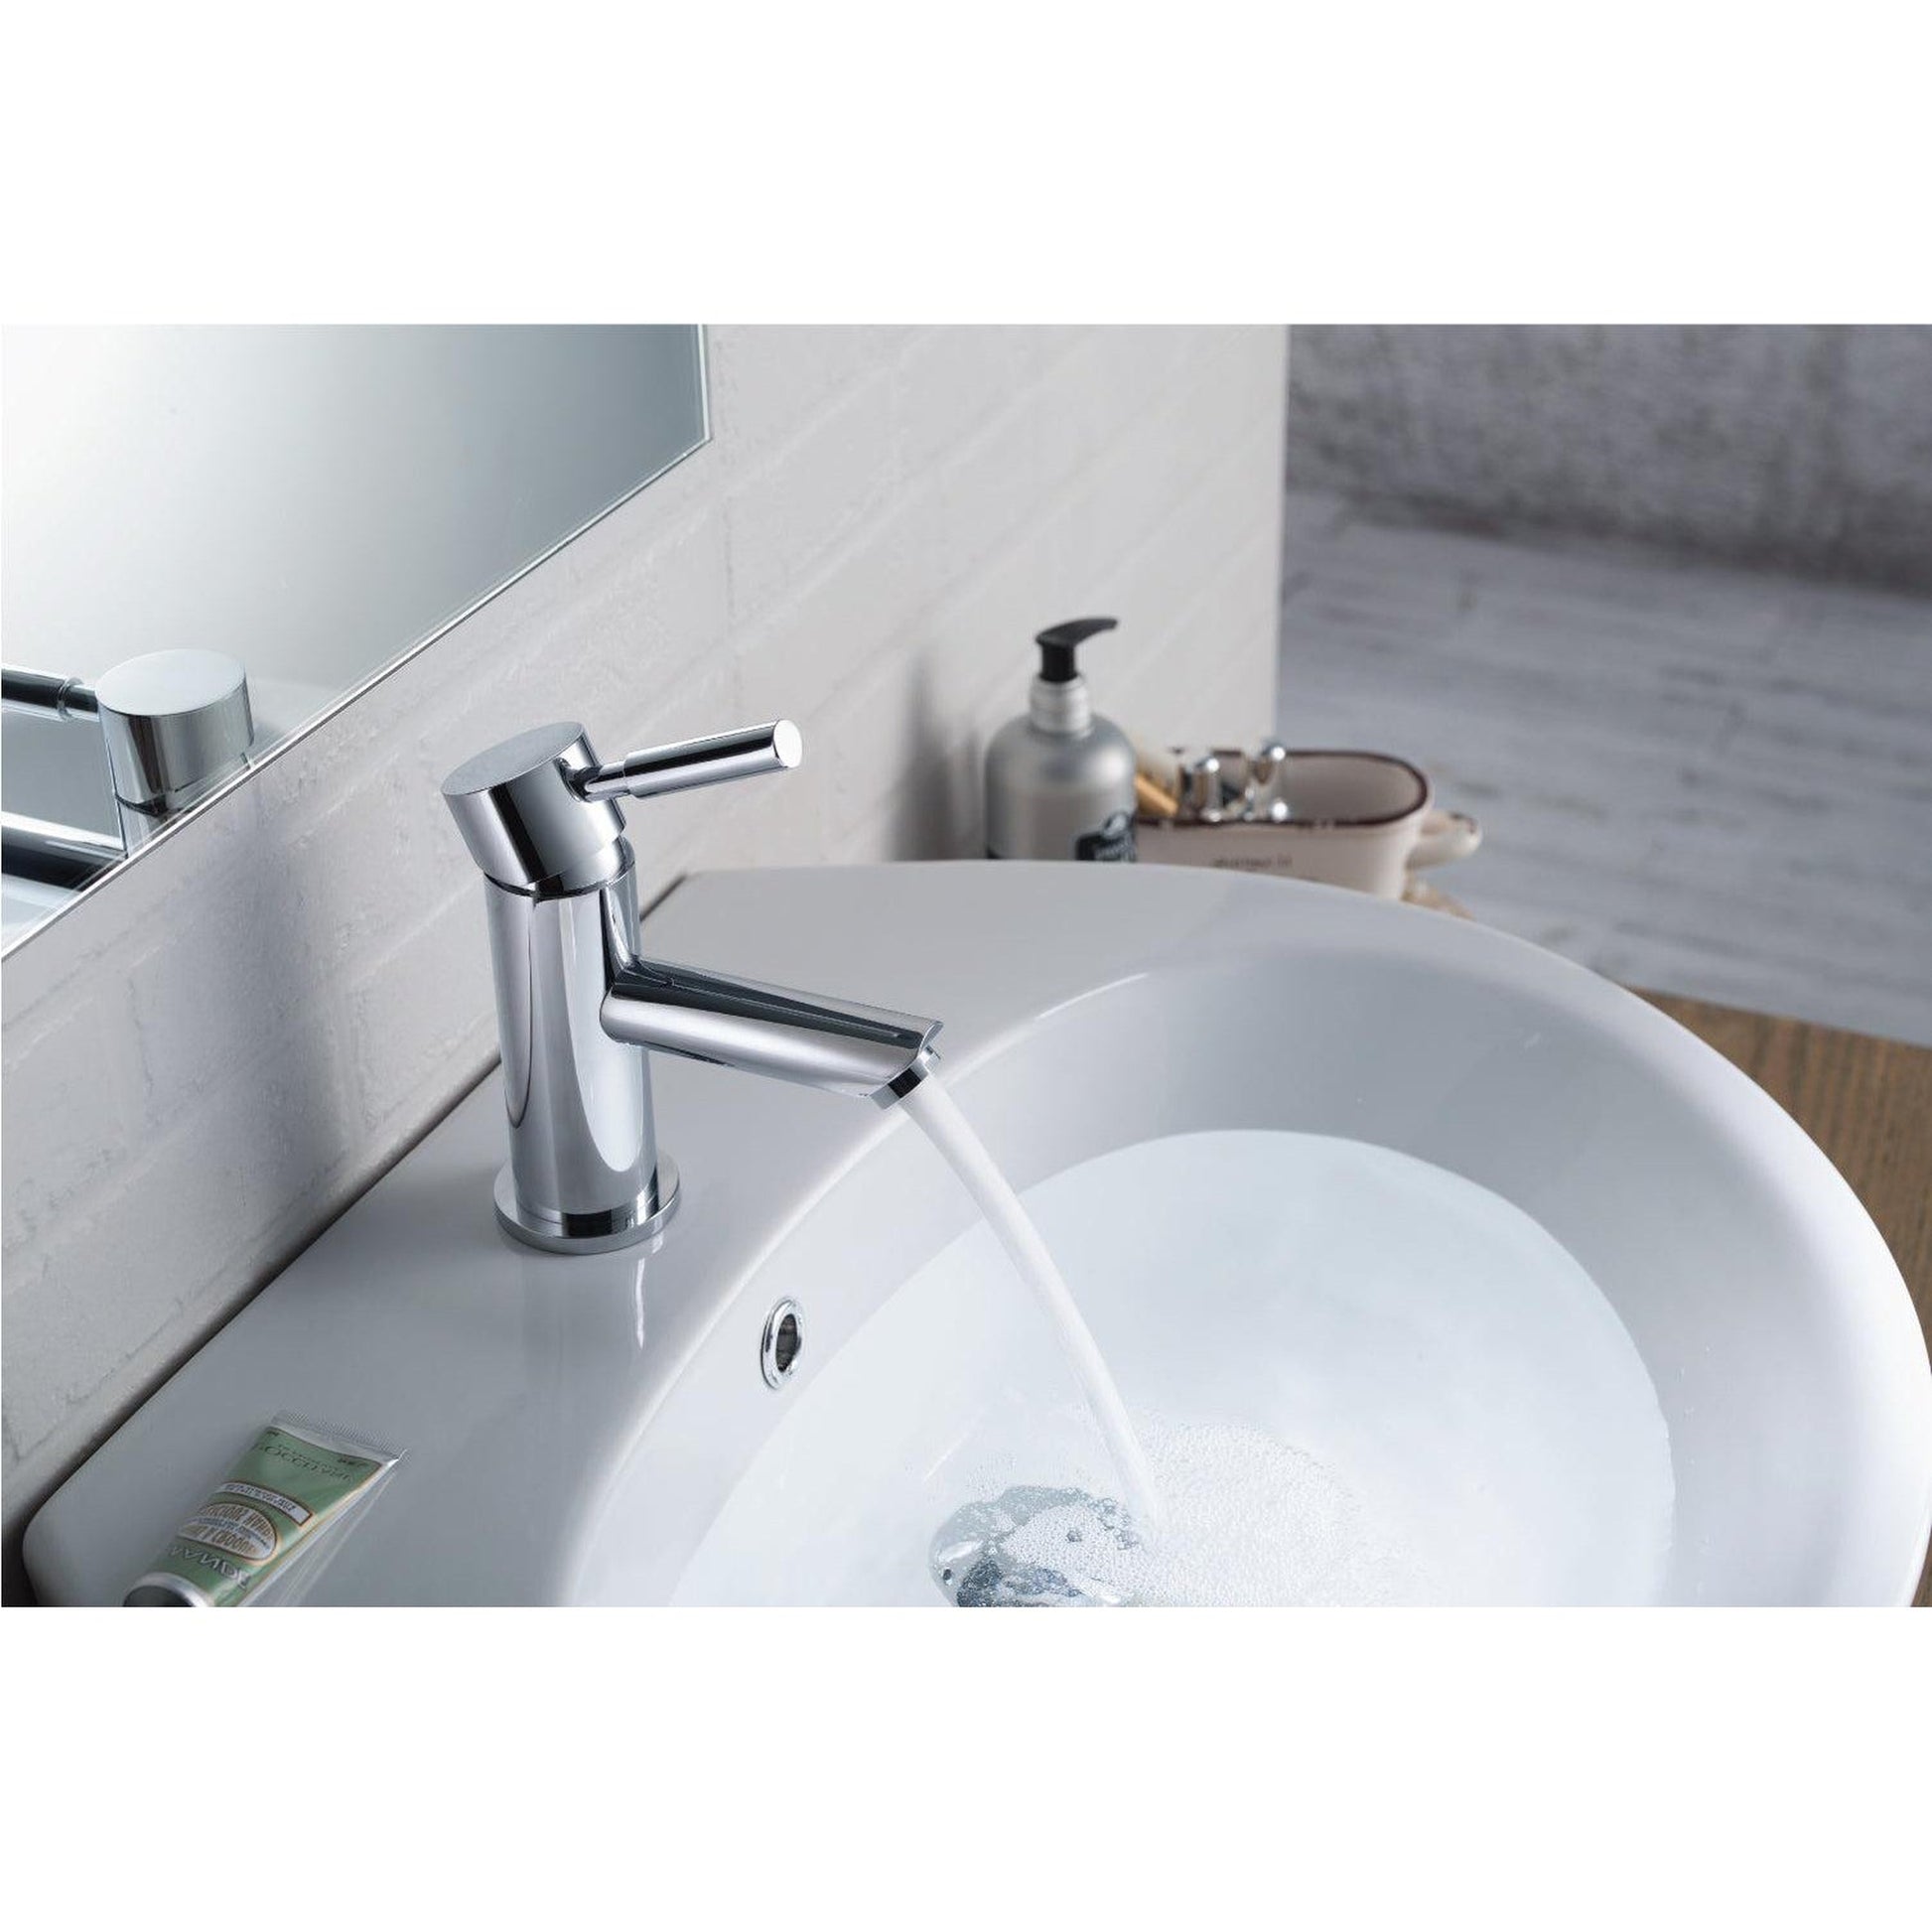 Isenberg Serie 100 6" Single-Hole Chrome Deck-Mounted Bathroom Sink Faucet With Pop-Up Drain